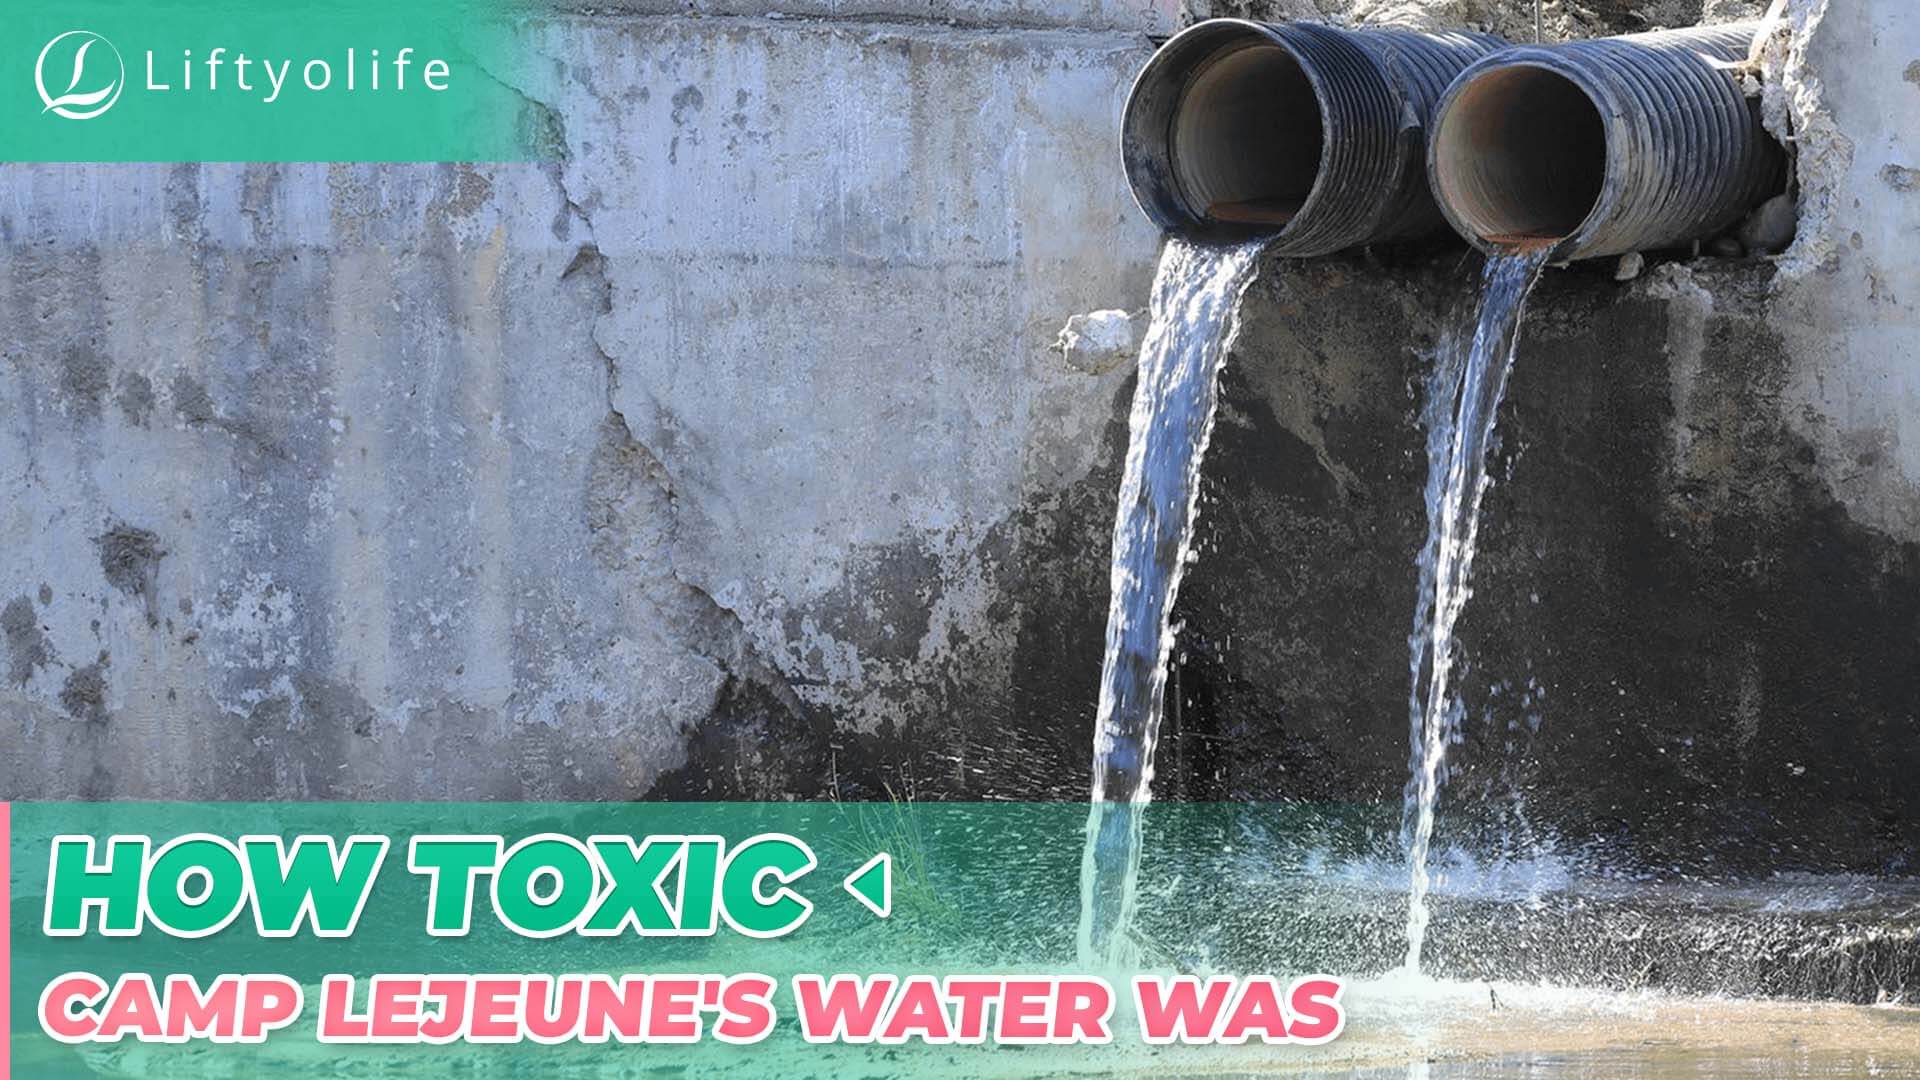 How Toxic Was Camp Lejeune's Water?